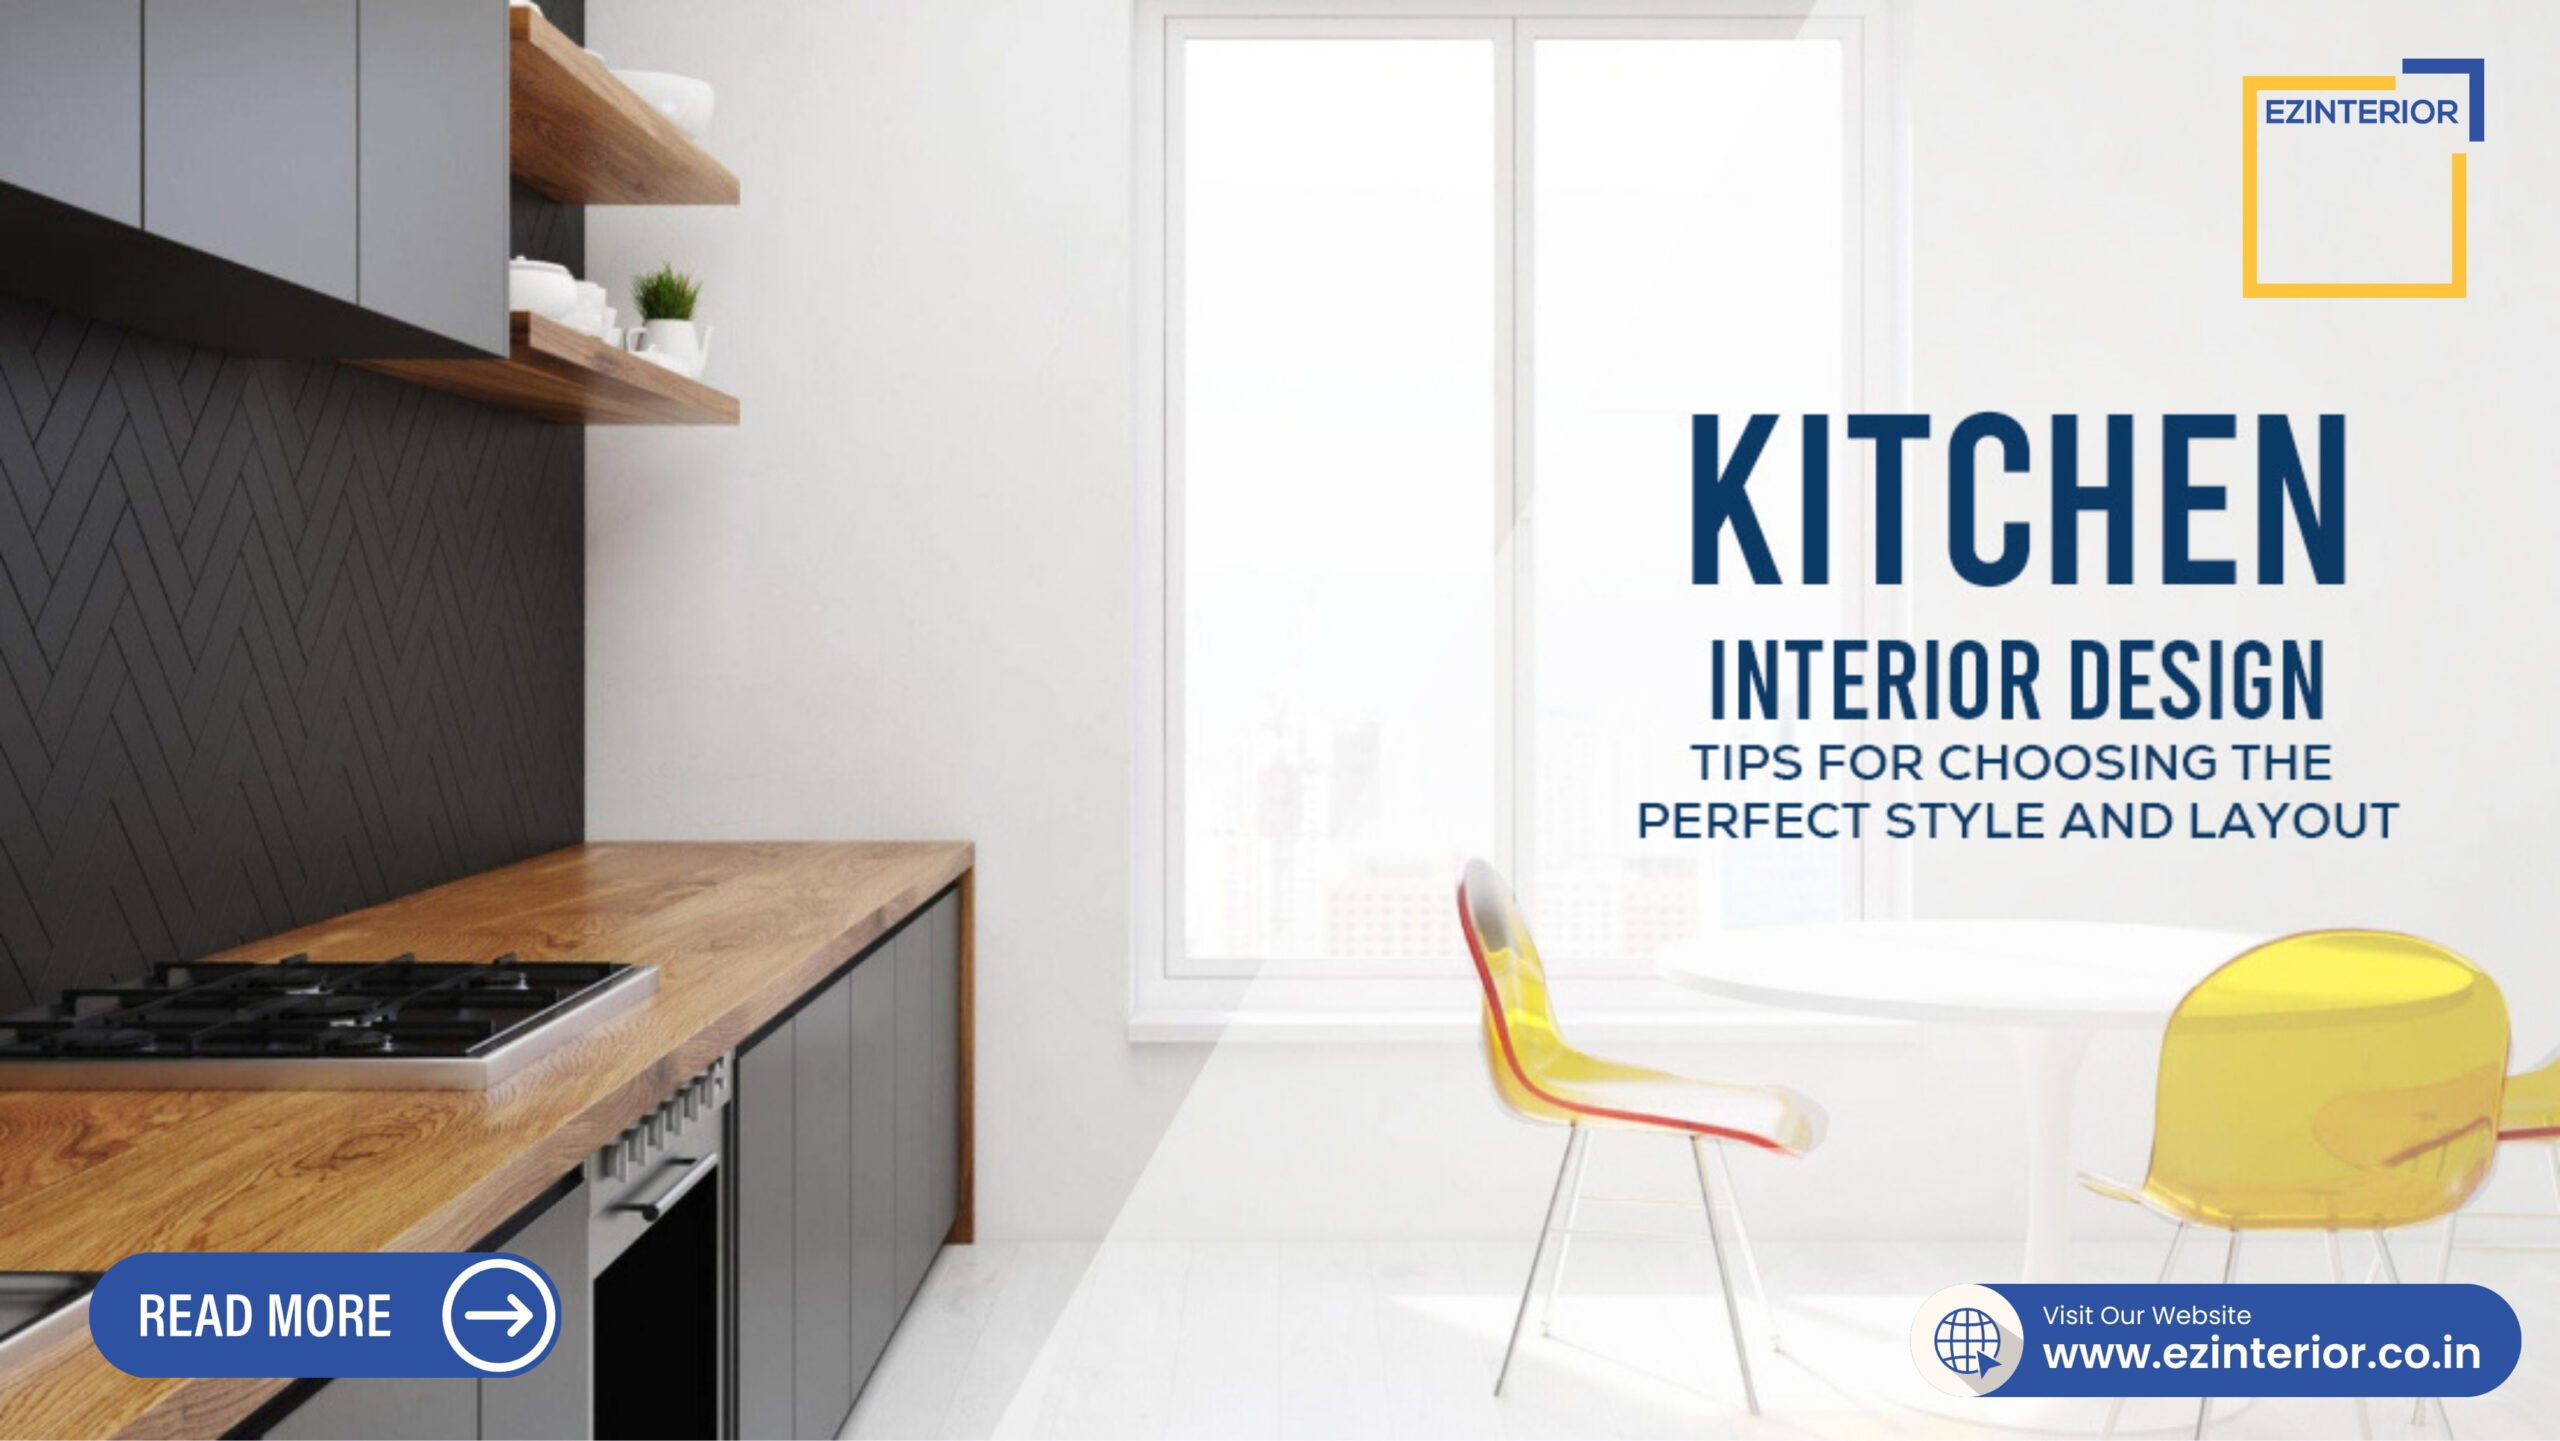 Kitchen Interior Design Tips For Choosing The Perfect Style And Layout